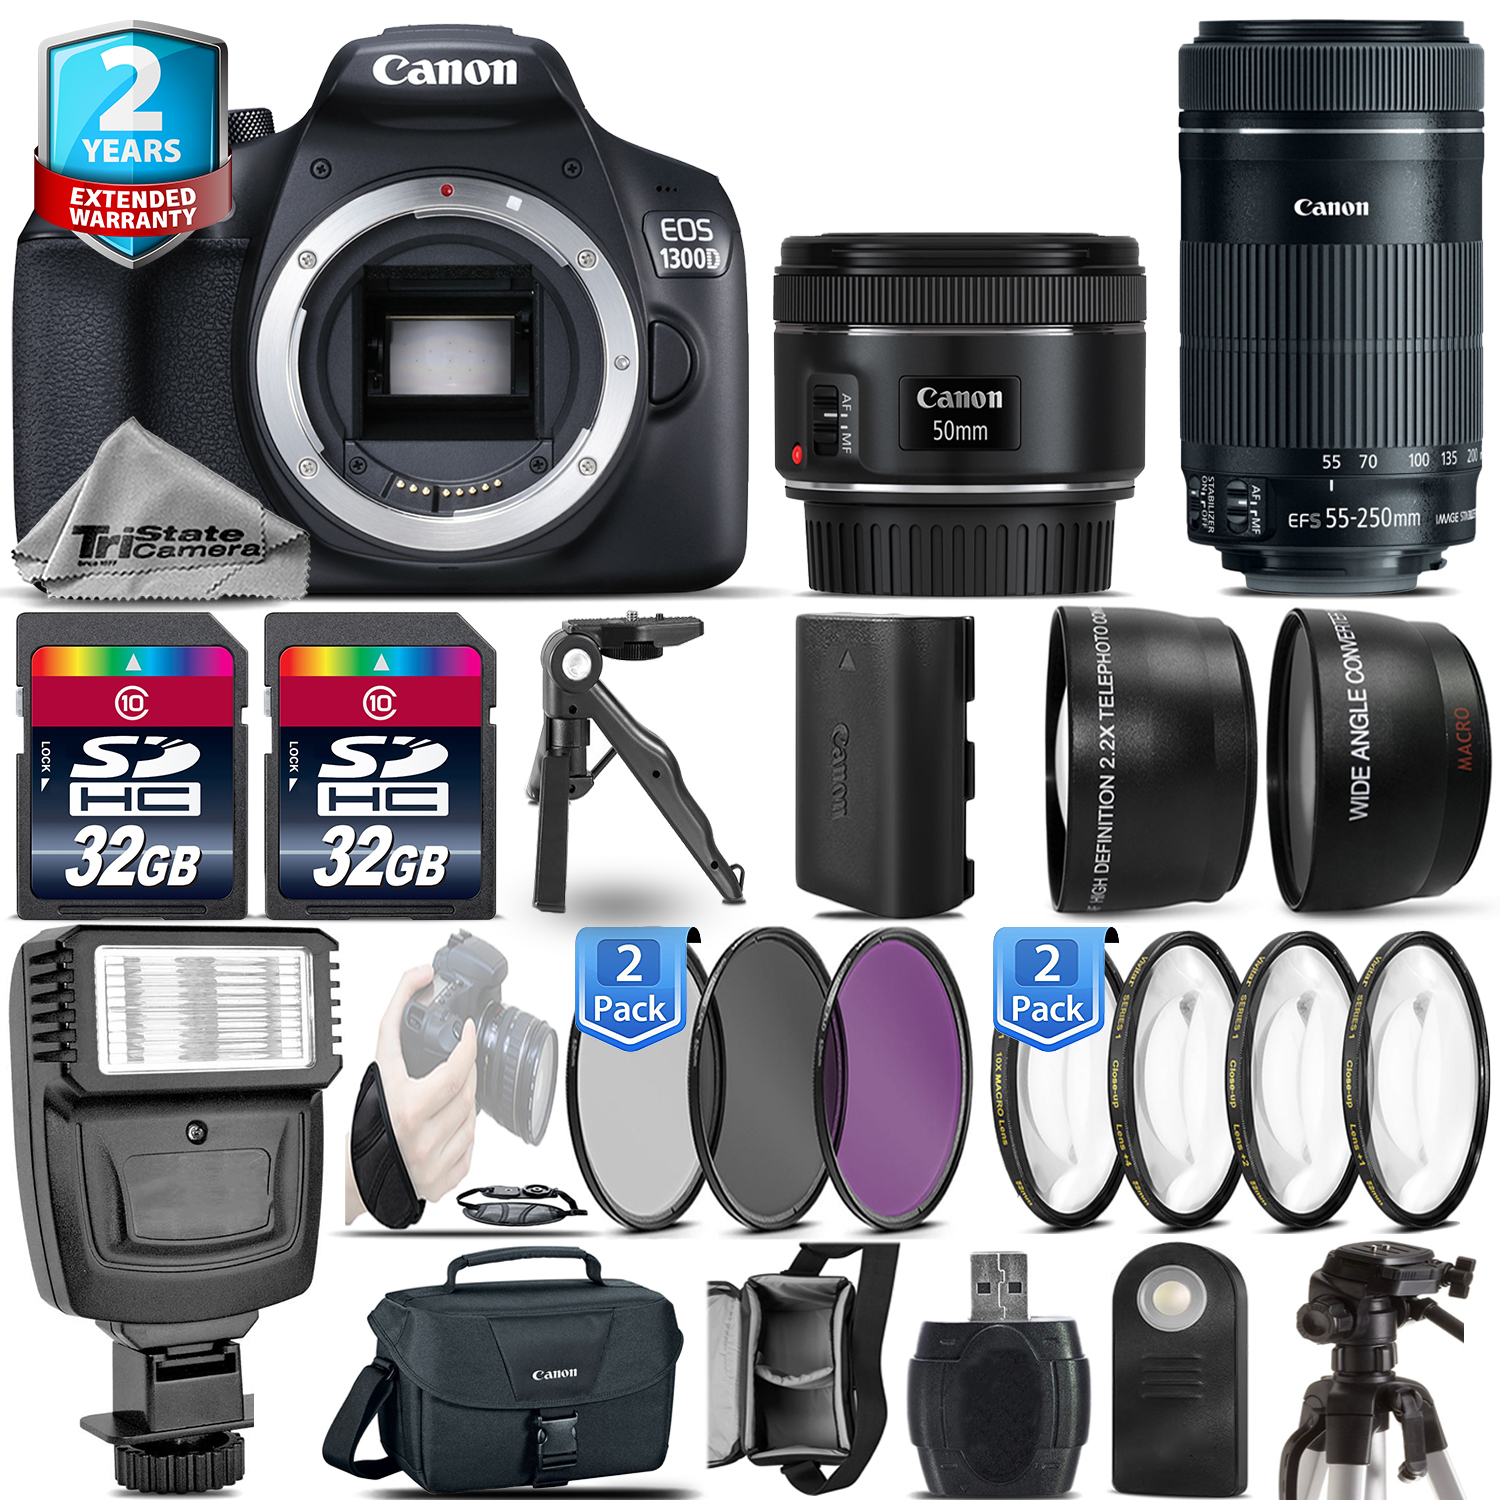 EOS Rebel 1300D / T6 Camera + 50mm 1.8 STM + 55-250mm IS + 2yr Warranty *FREE SHIPPING*